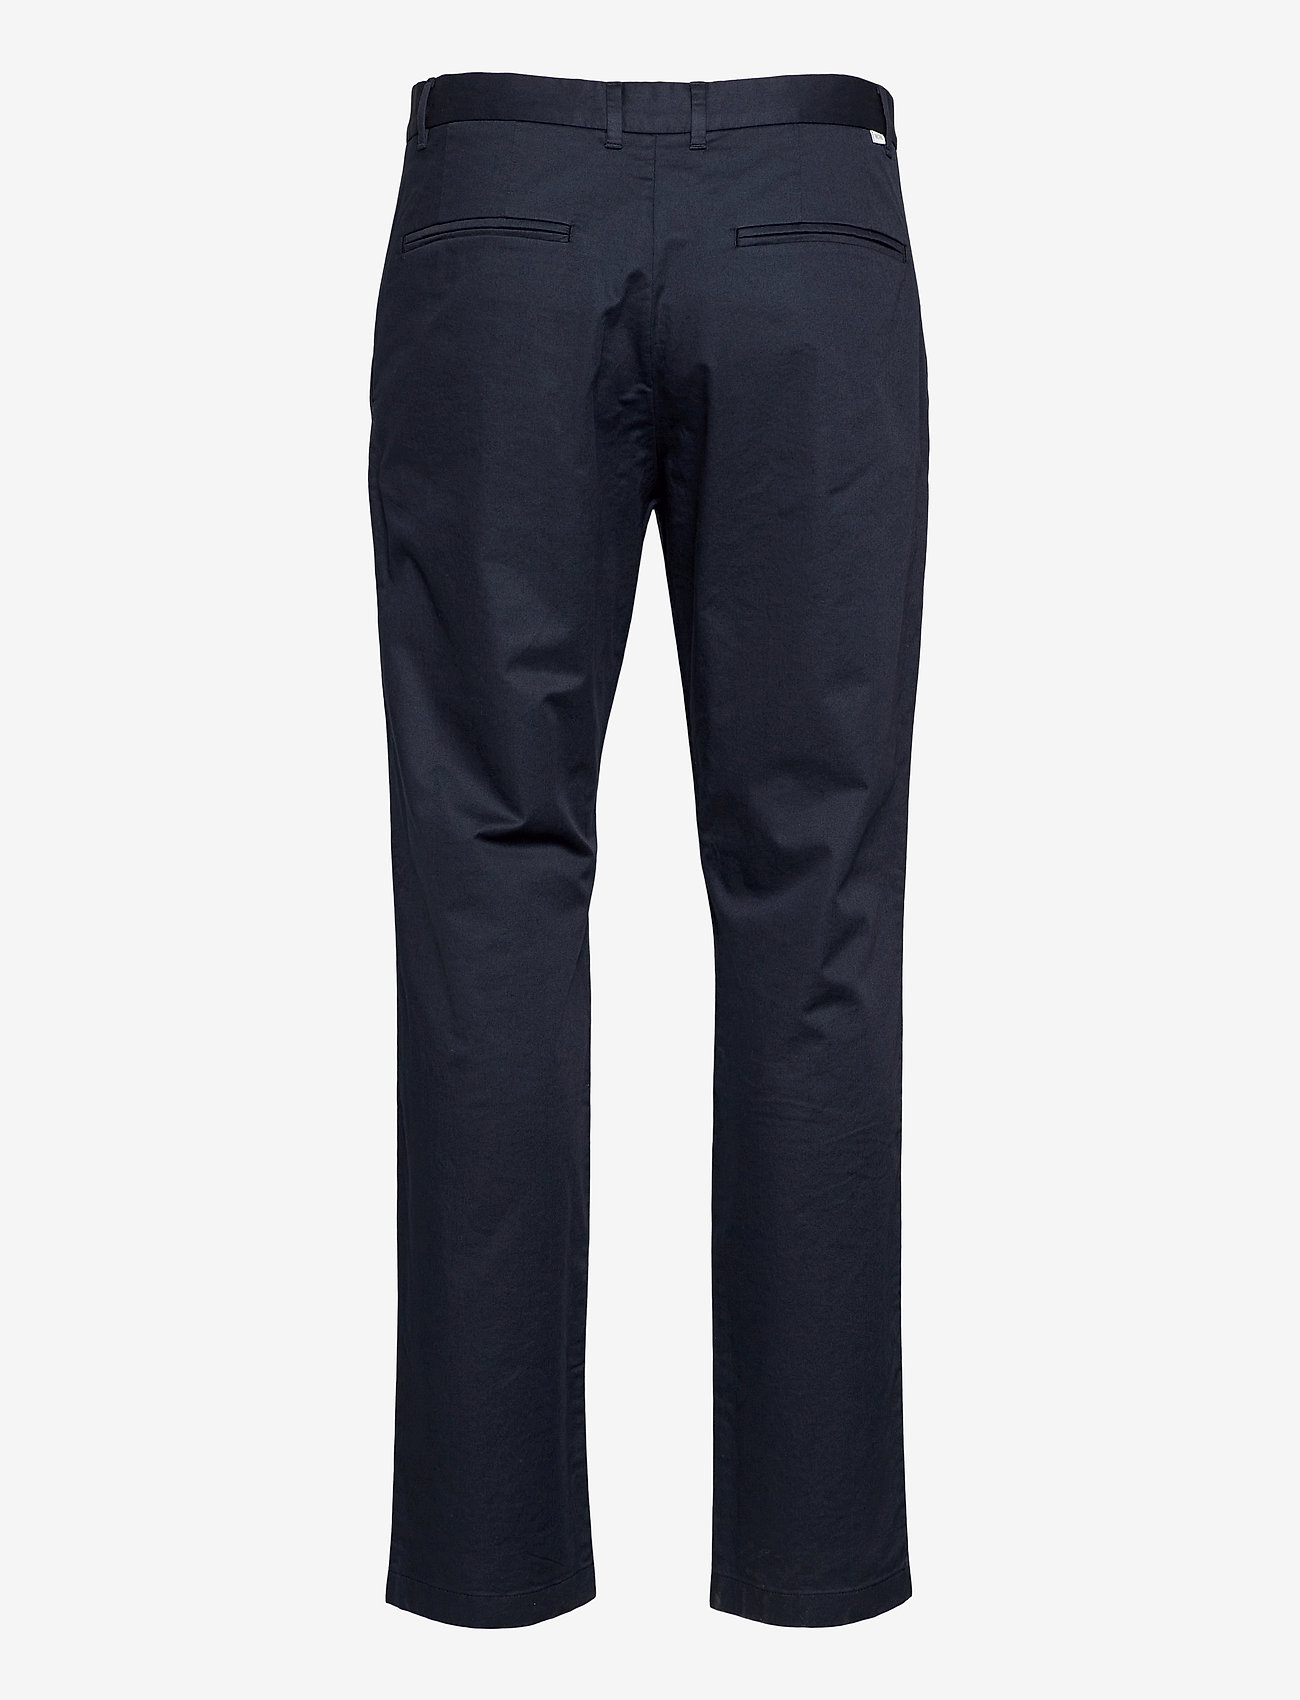 Wood Wood - Marcus light twill trousers - chino's - navy - 1